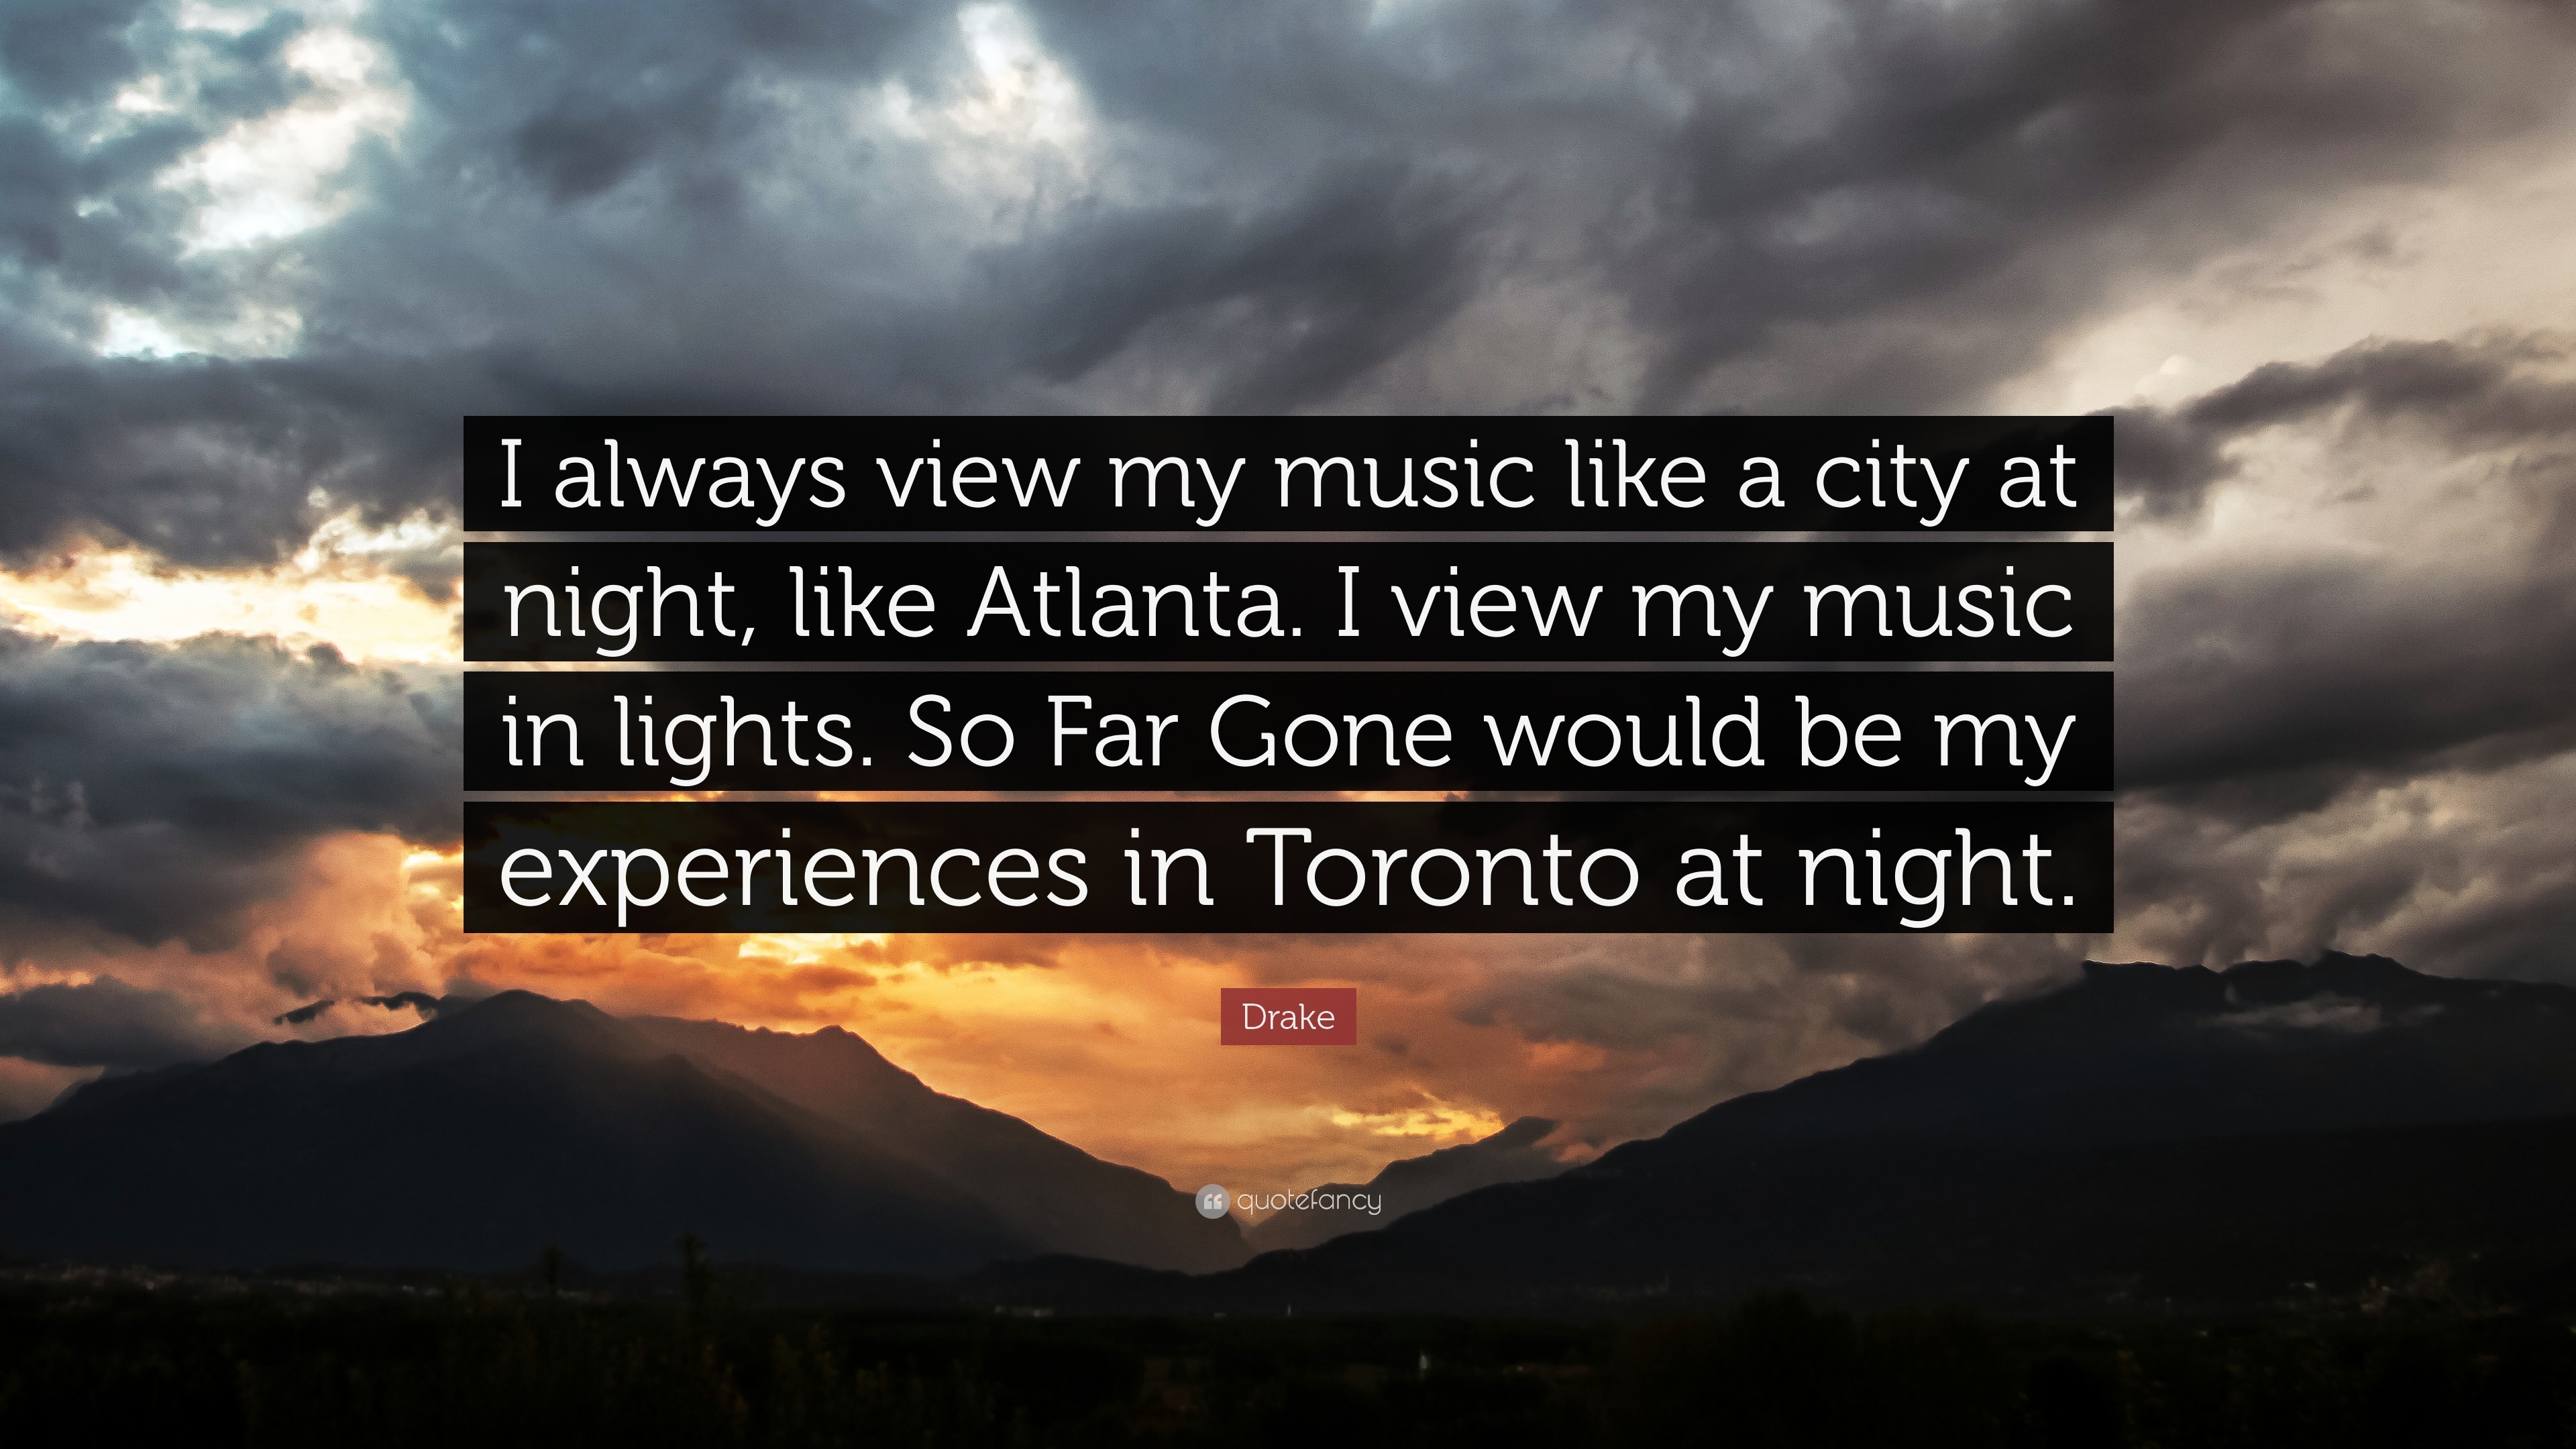 3840x2160 Drake Quote: “I always view my music like a city at night, like